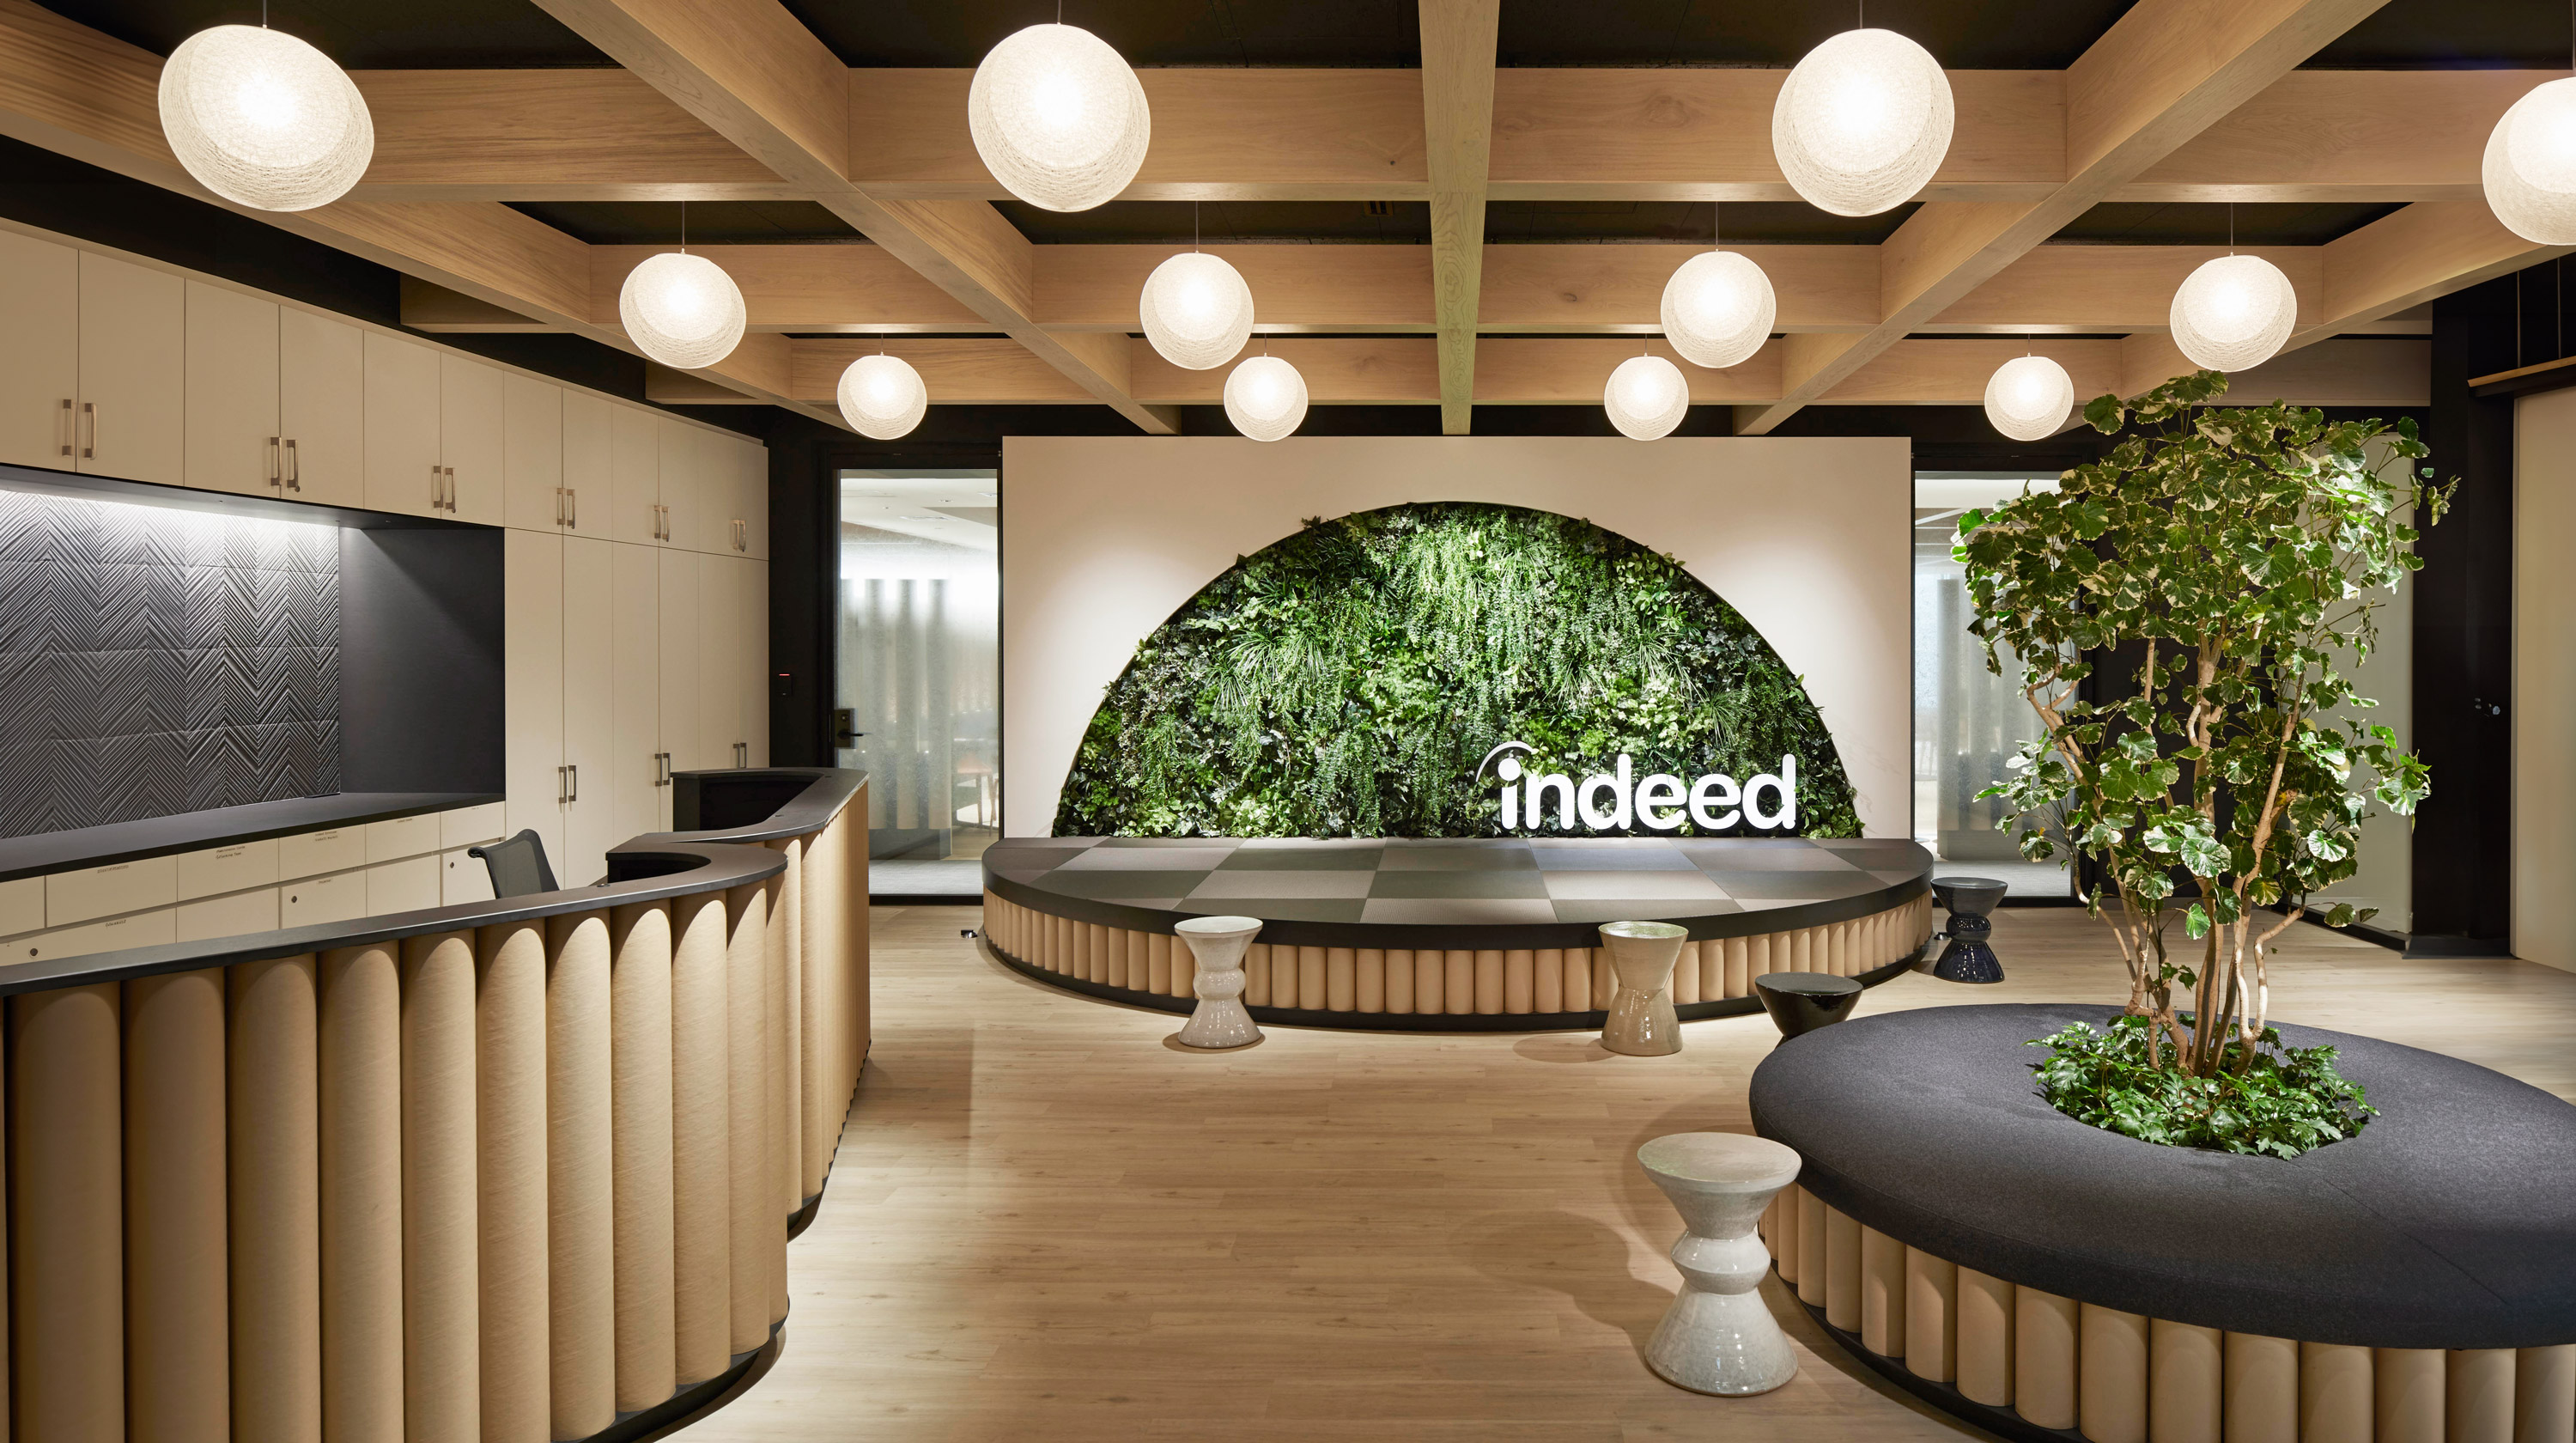 Reception desk featuring welcoming wood and greenery of Indeed.com Tokyo, Japan by Specht Novak Architects.